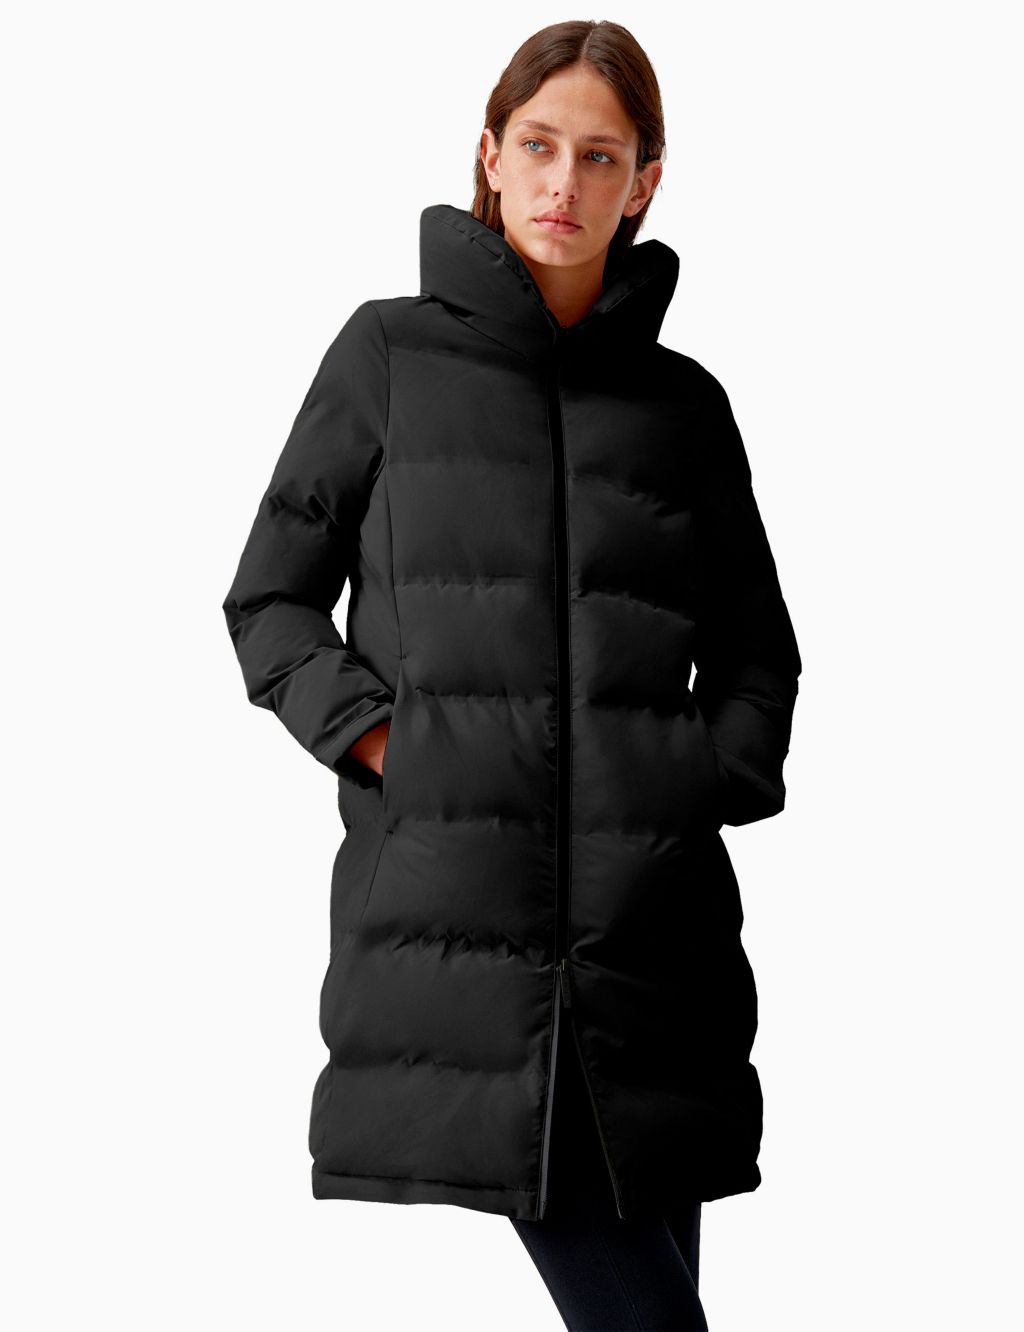 Waterproof Quilted Padded Coat image 1